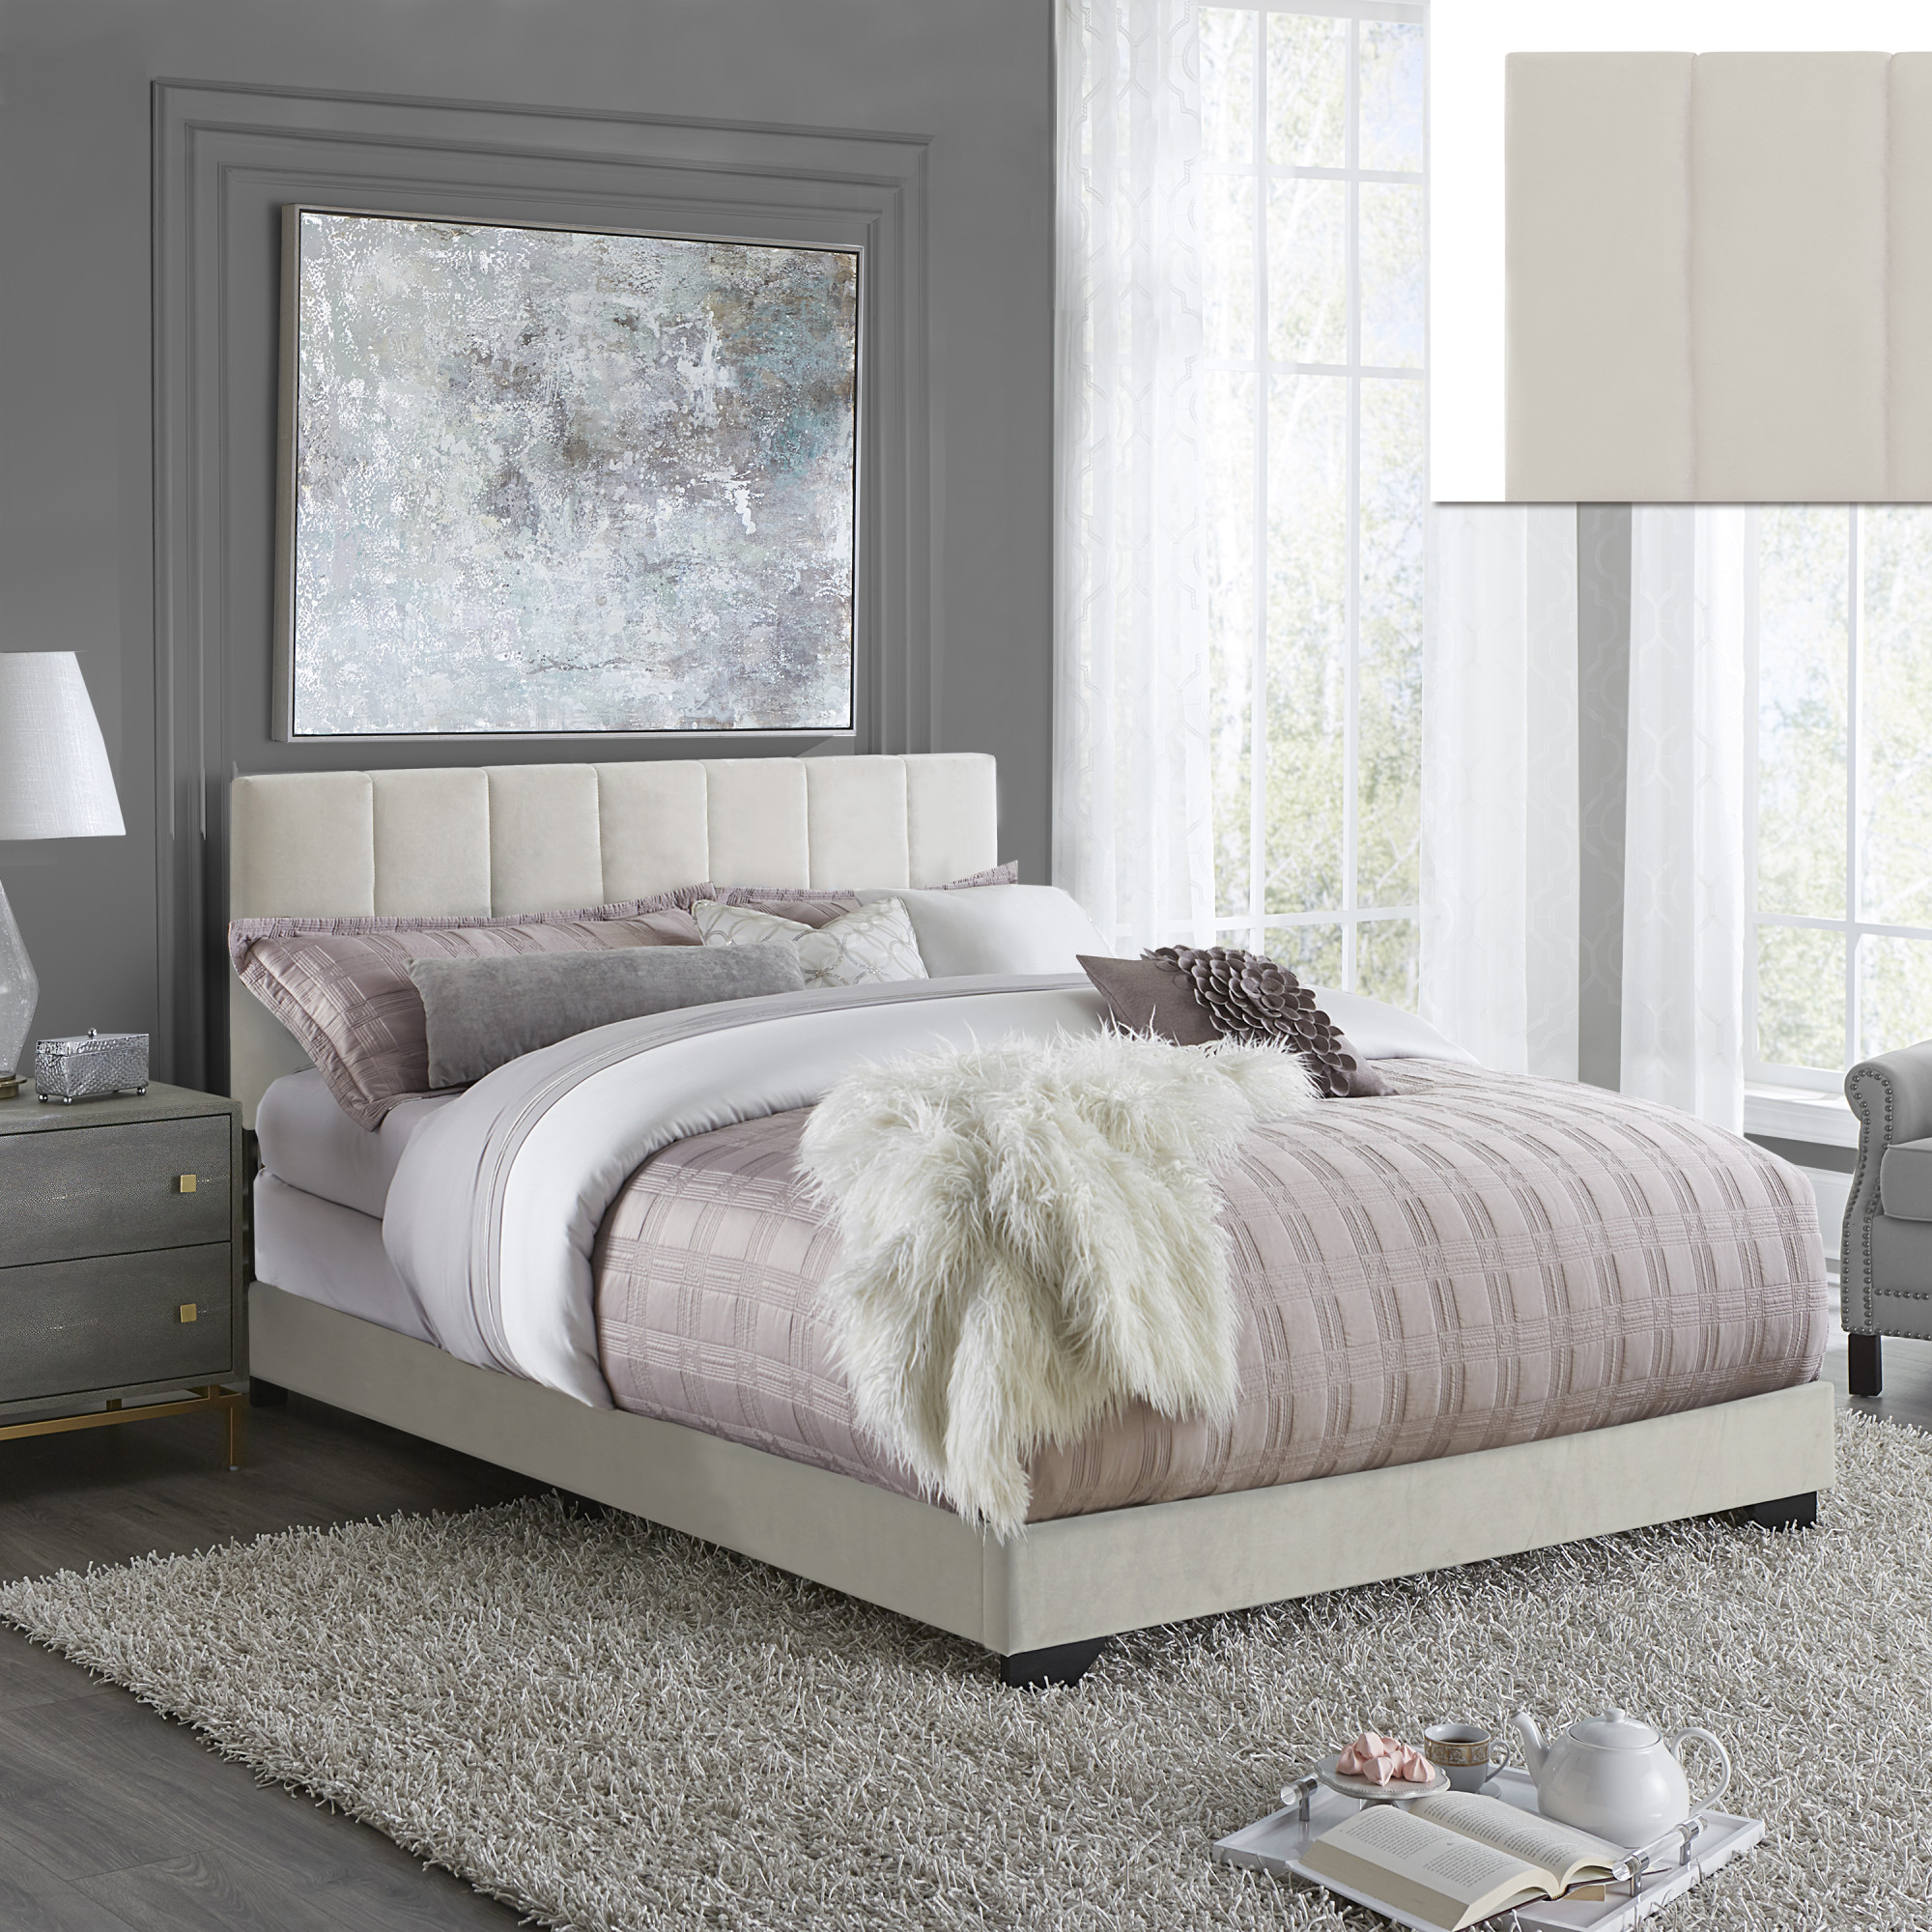 Reece Channel Stitched Upholstered Queen Bed, Ivory, by Hillsdale Living Essentials - image 5 of 17